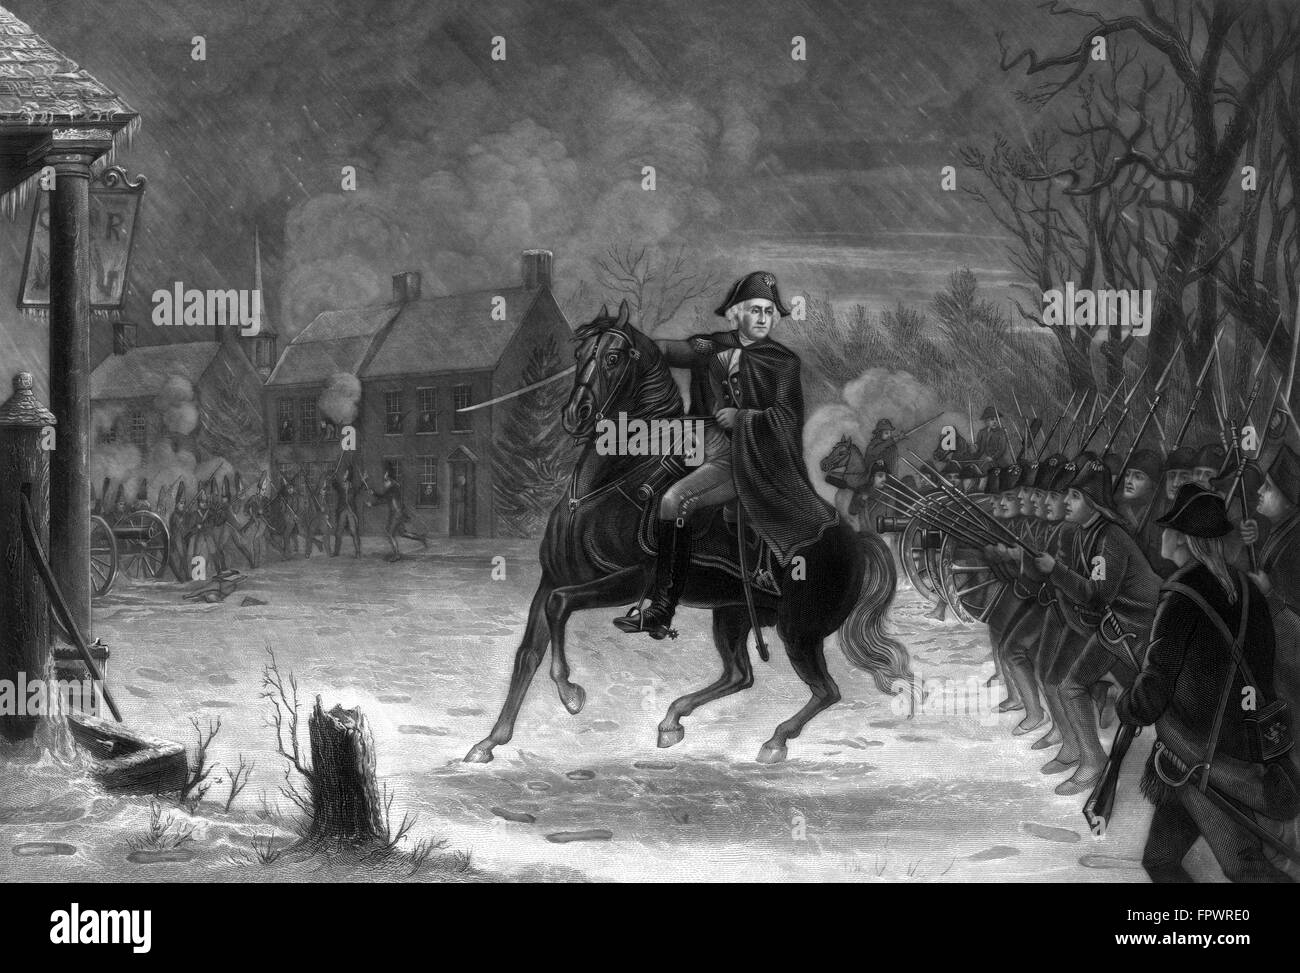 Vintage American History print of General George Washington on his horse, leading armed troops, at The Battle of Trenton. Stock Photo